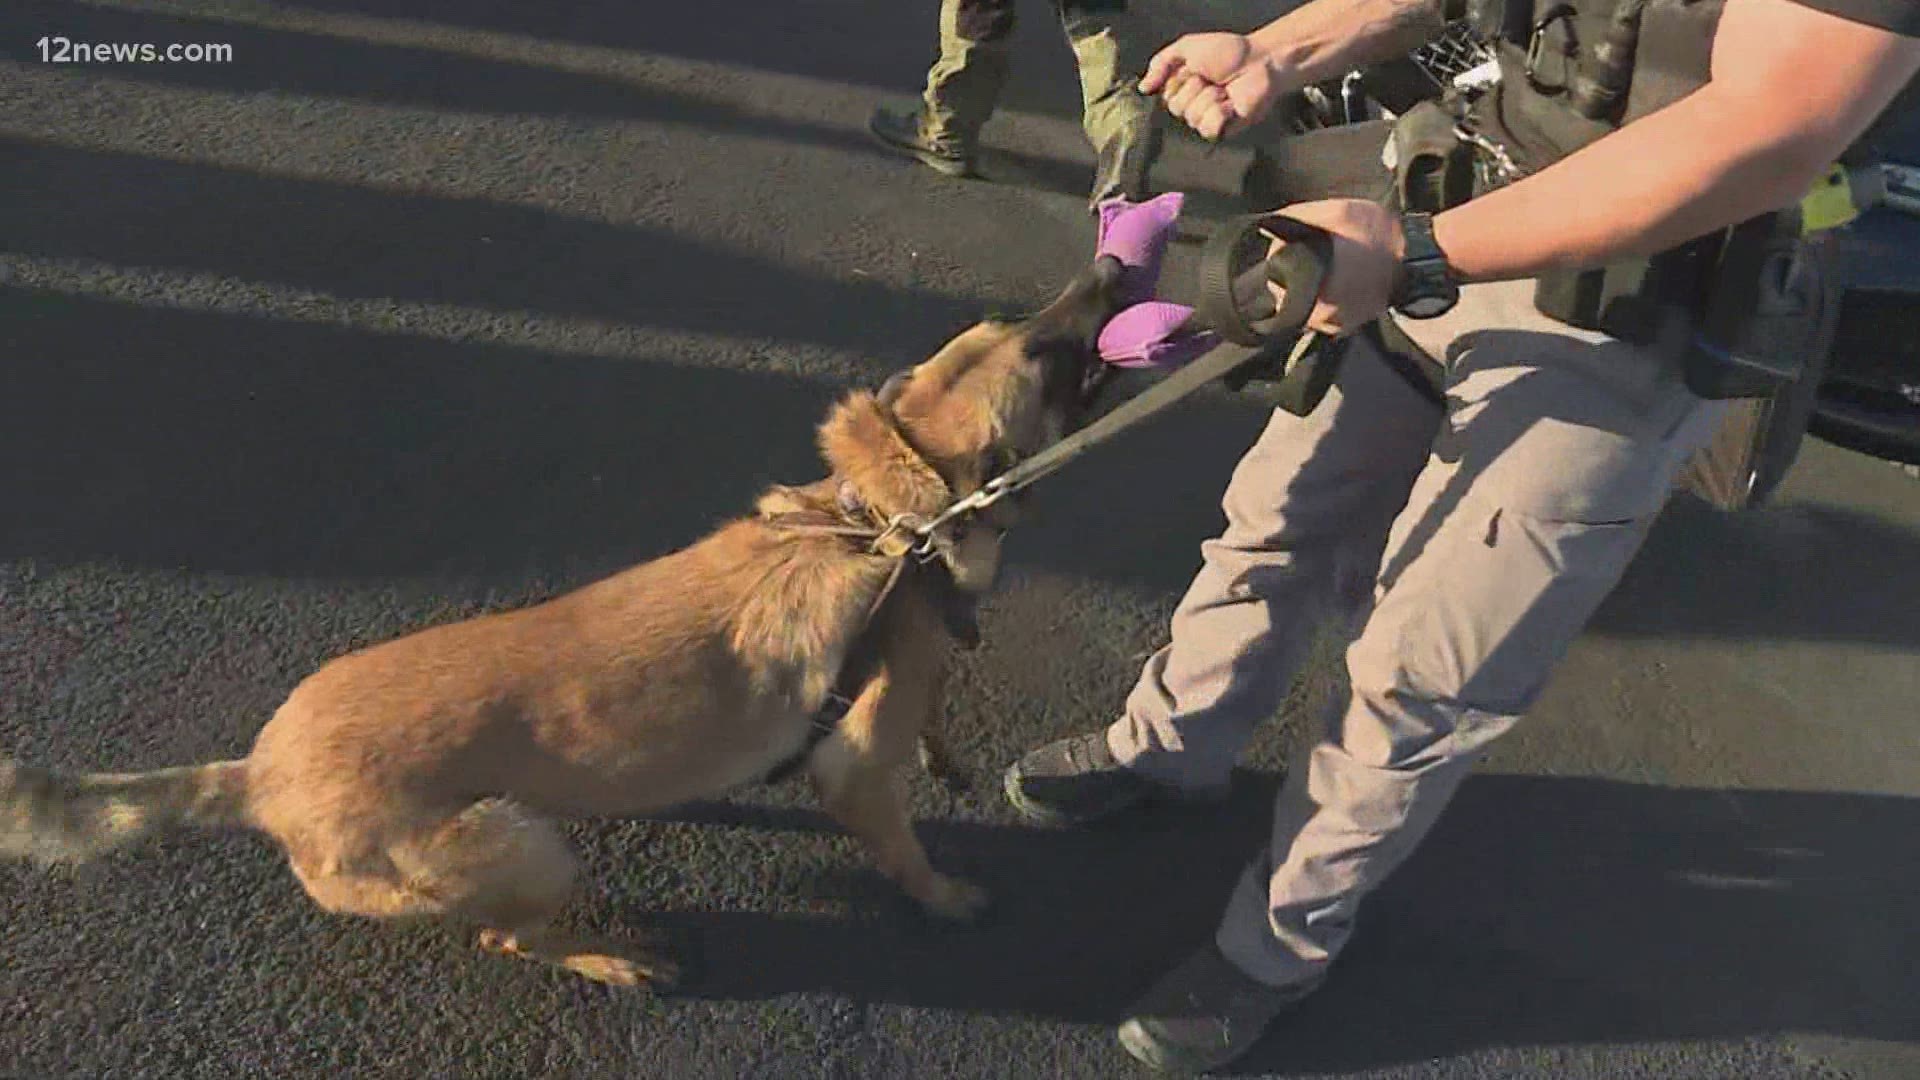 Police, military, and government canine teams from across the U.S. are taking part in the 18th annual Desert Dog Police K9 trials at the West World of Scottsdale.